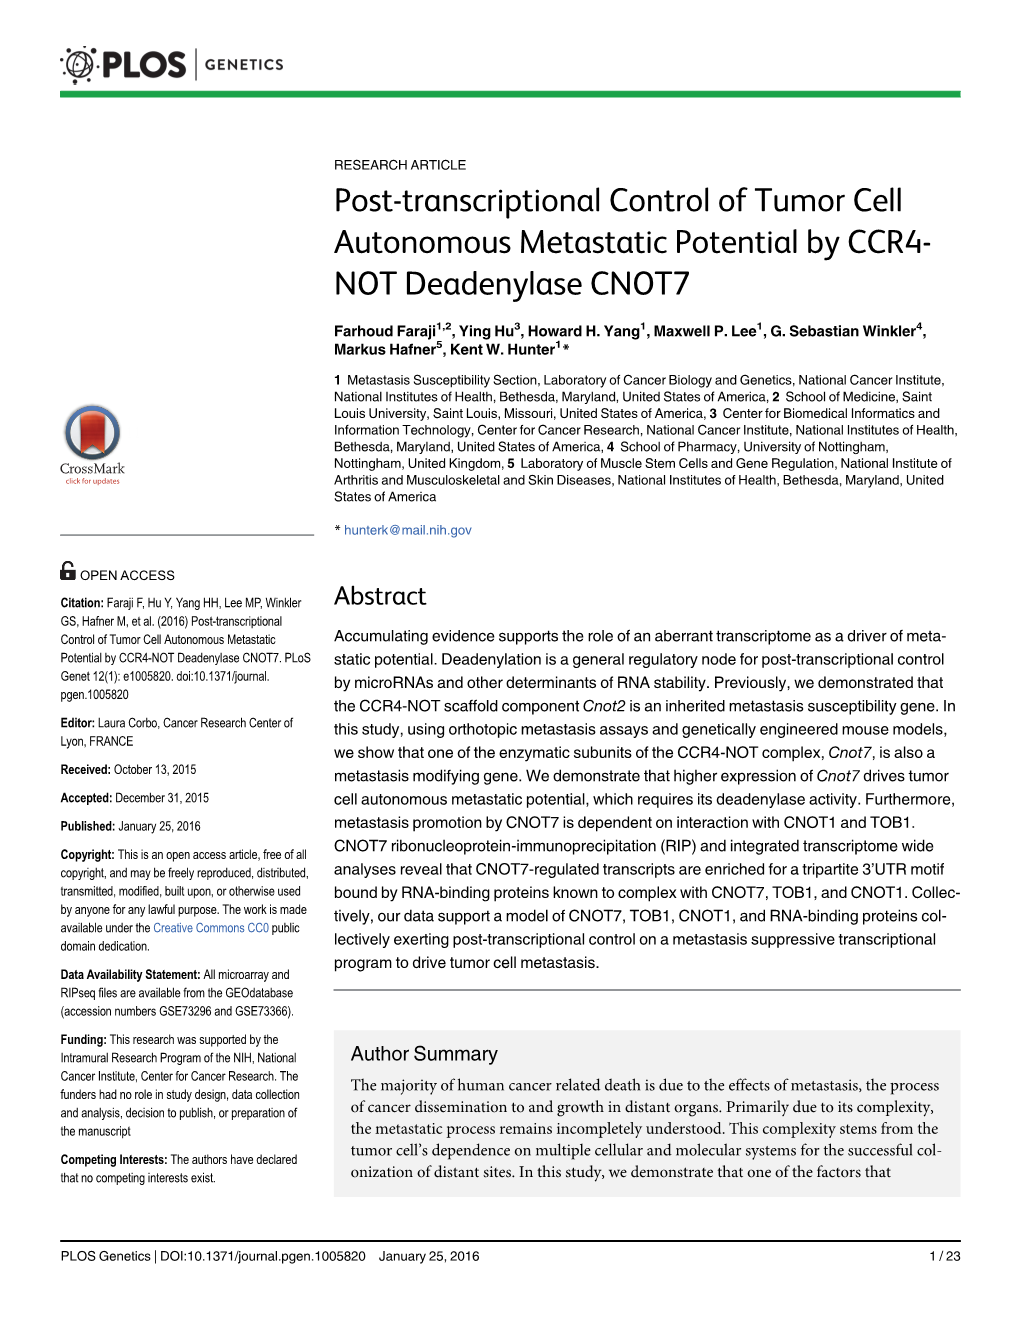 Post-Transcriptional Control of Tumor Cell Autonomous Metastatic Potential by CCR4- NOT Deadenylase CNOT7